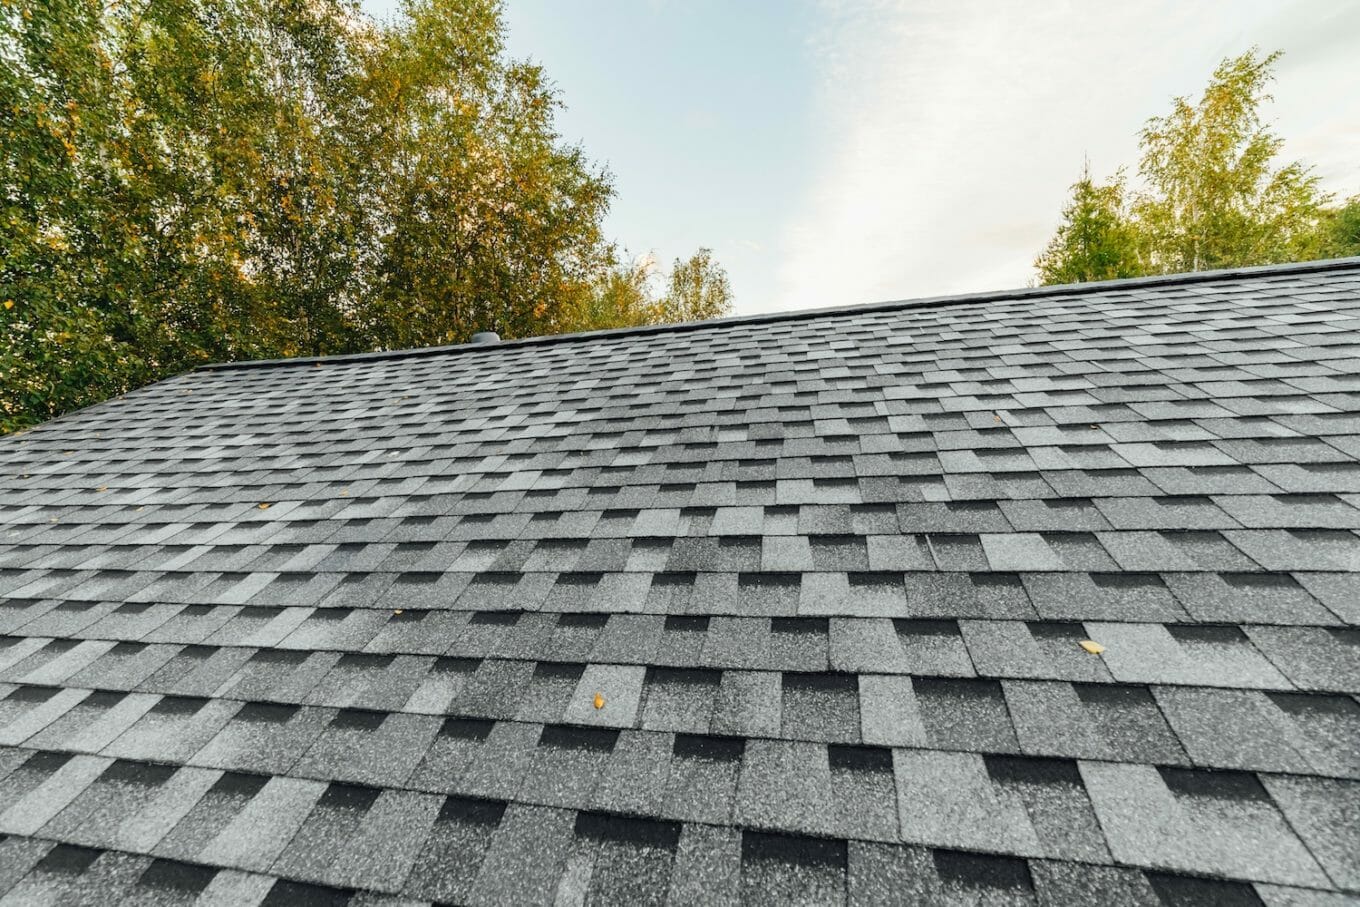 when to replace roof materials slanted view of asphalt shingle roof with sunny sky in background